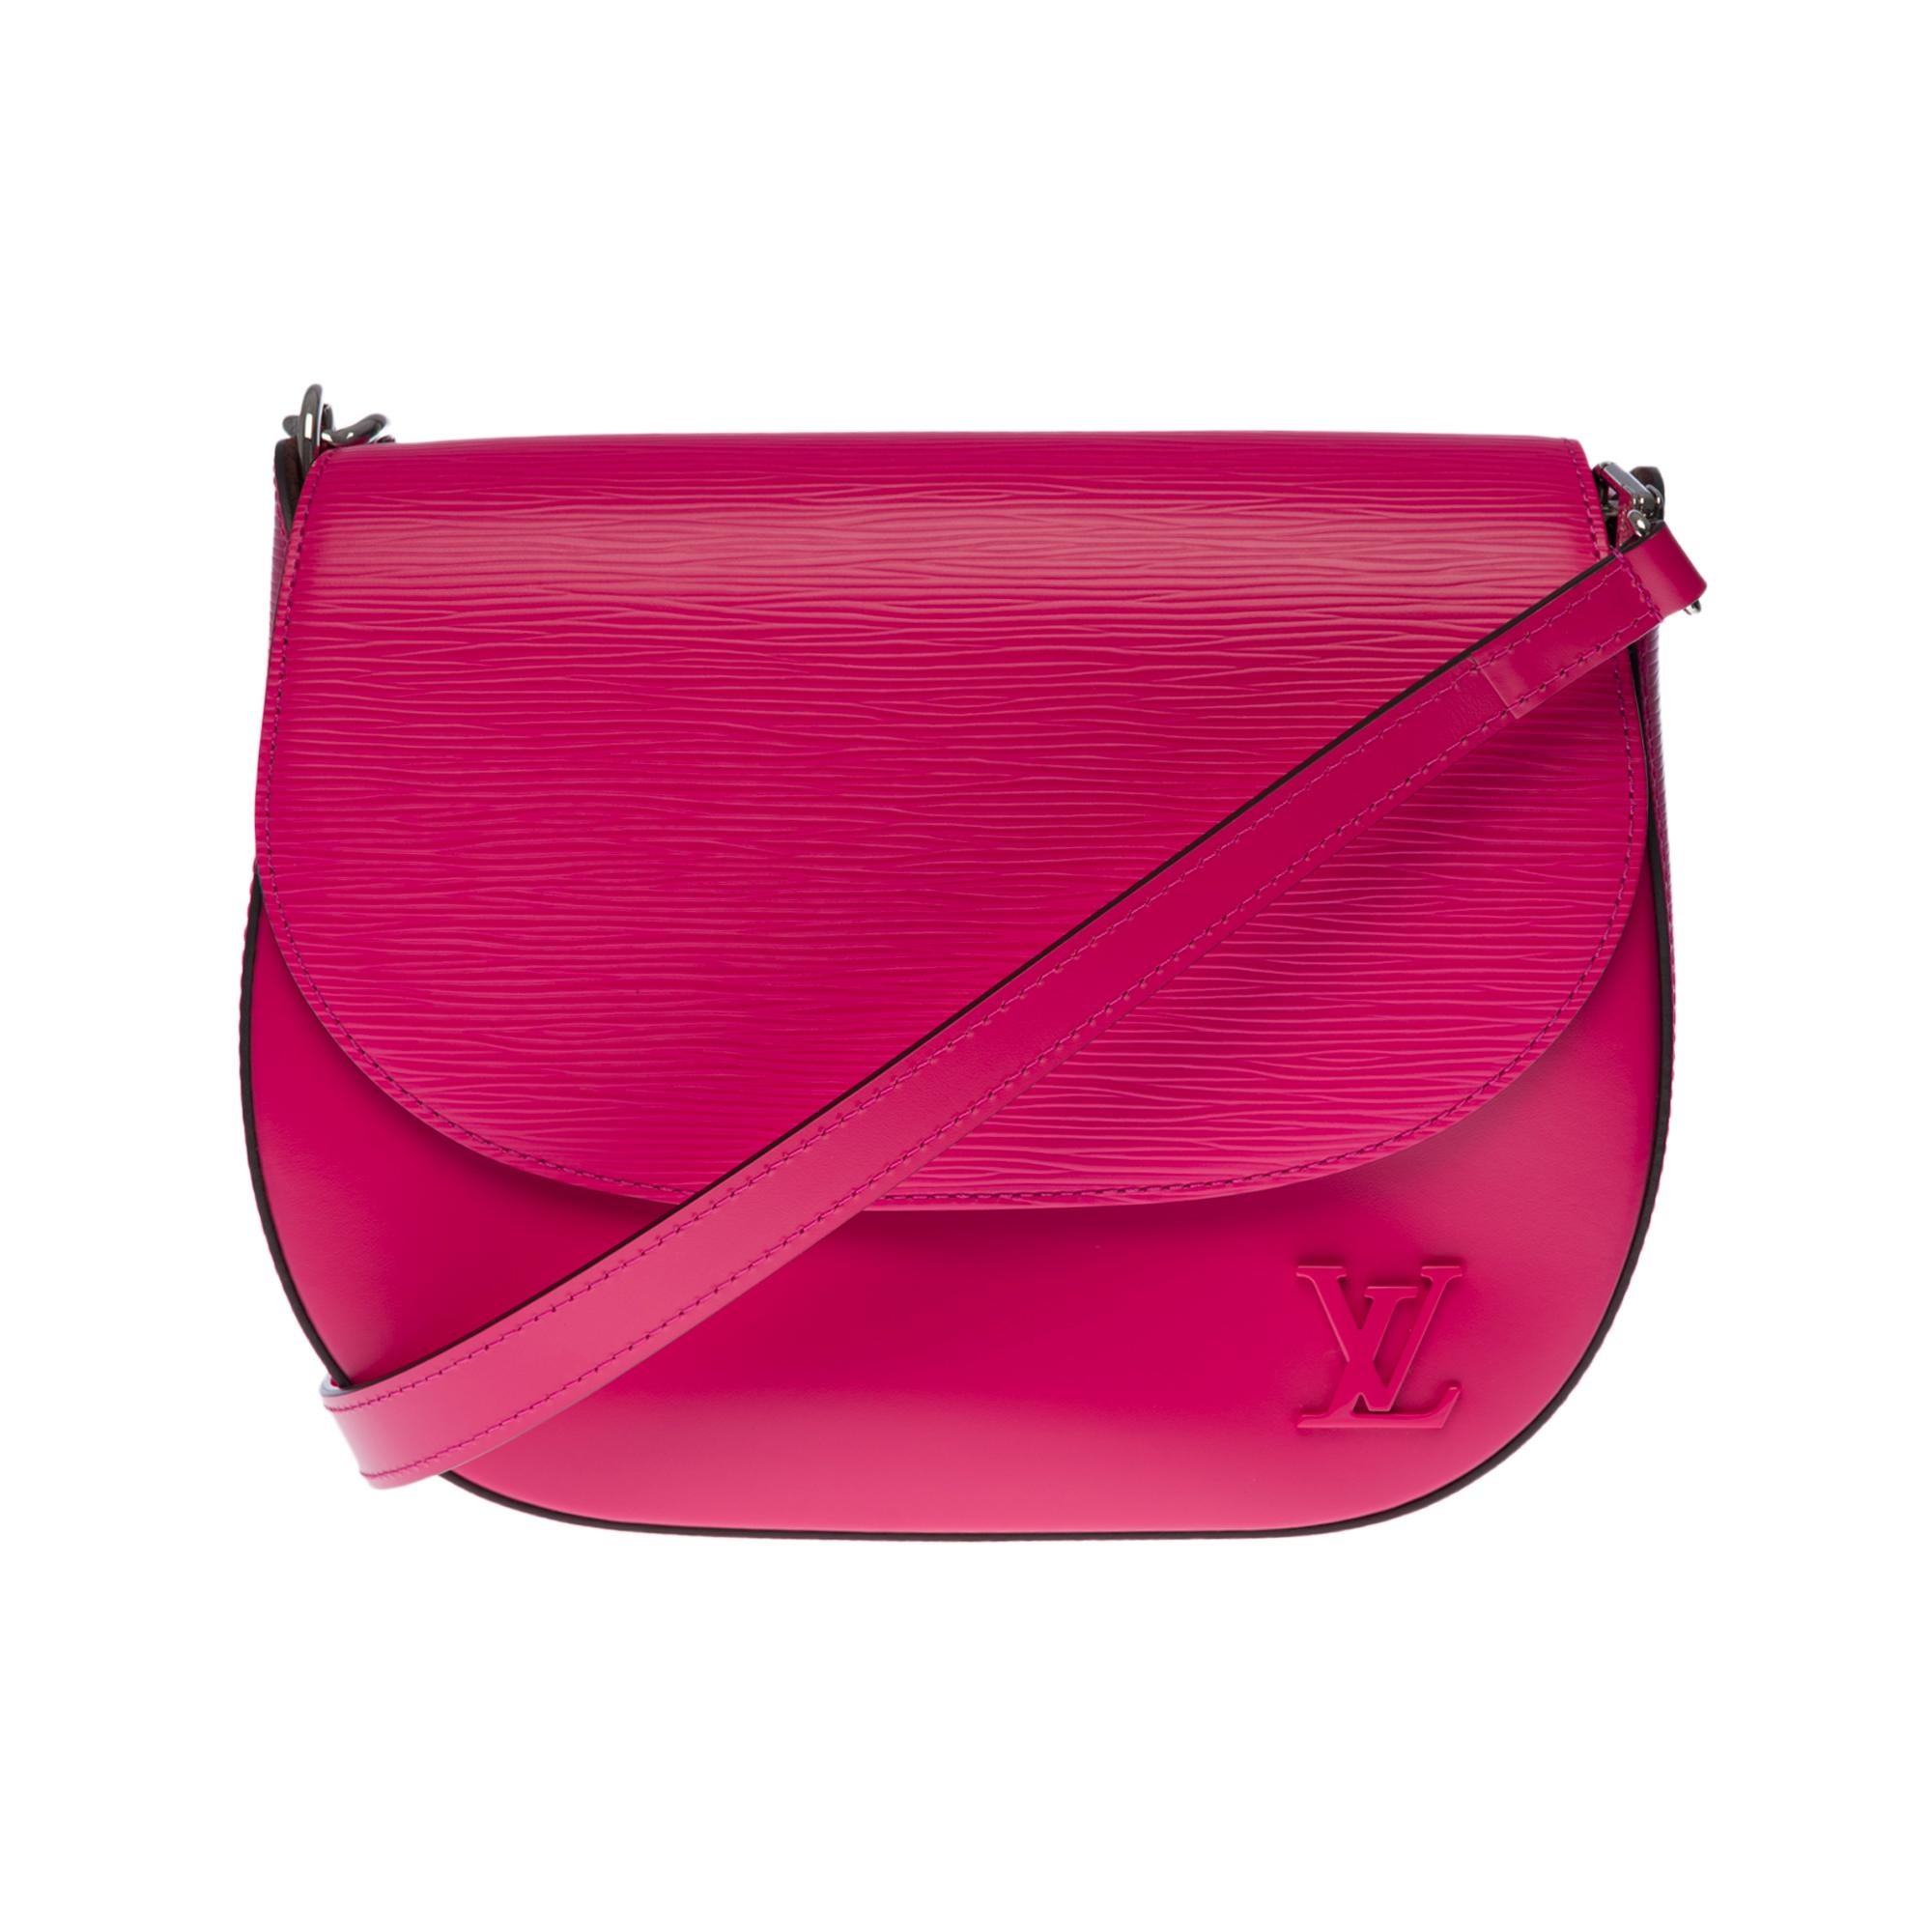 Very Chic Louis Vuitton Luna shoulder bag in Pink epi leather leather, SHW In Excellent Condition In Paris, IDF